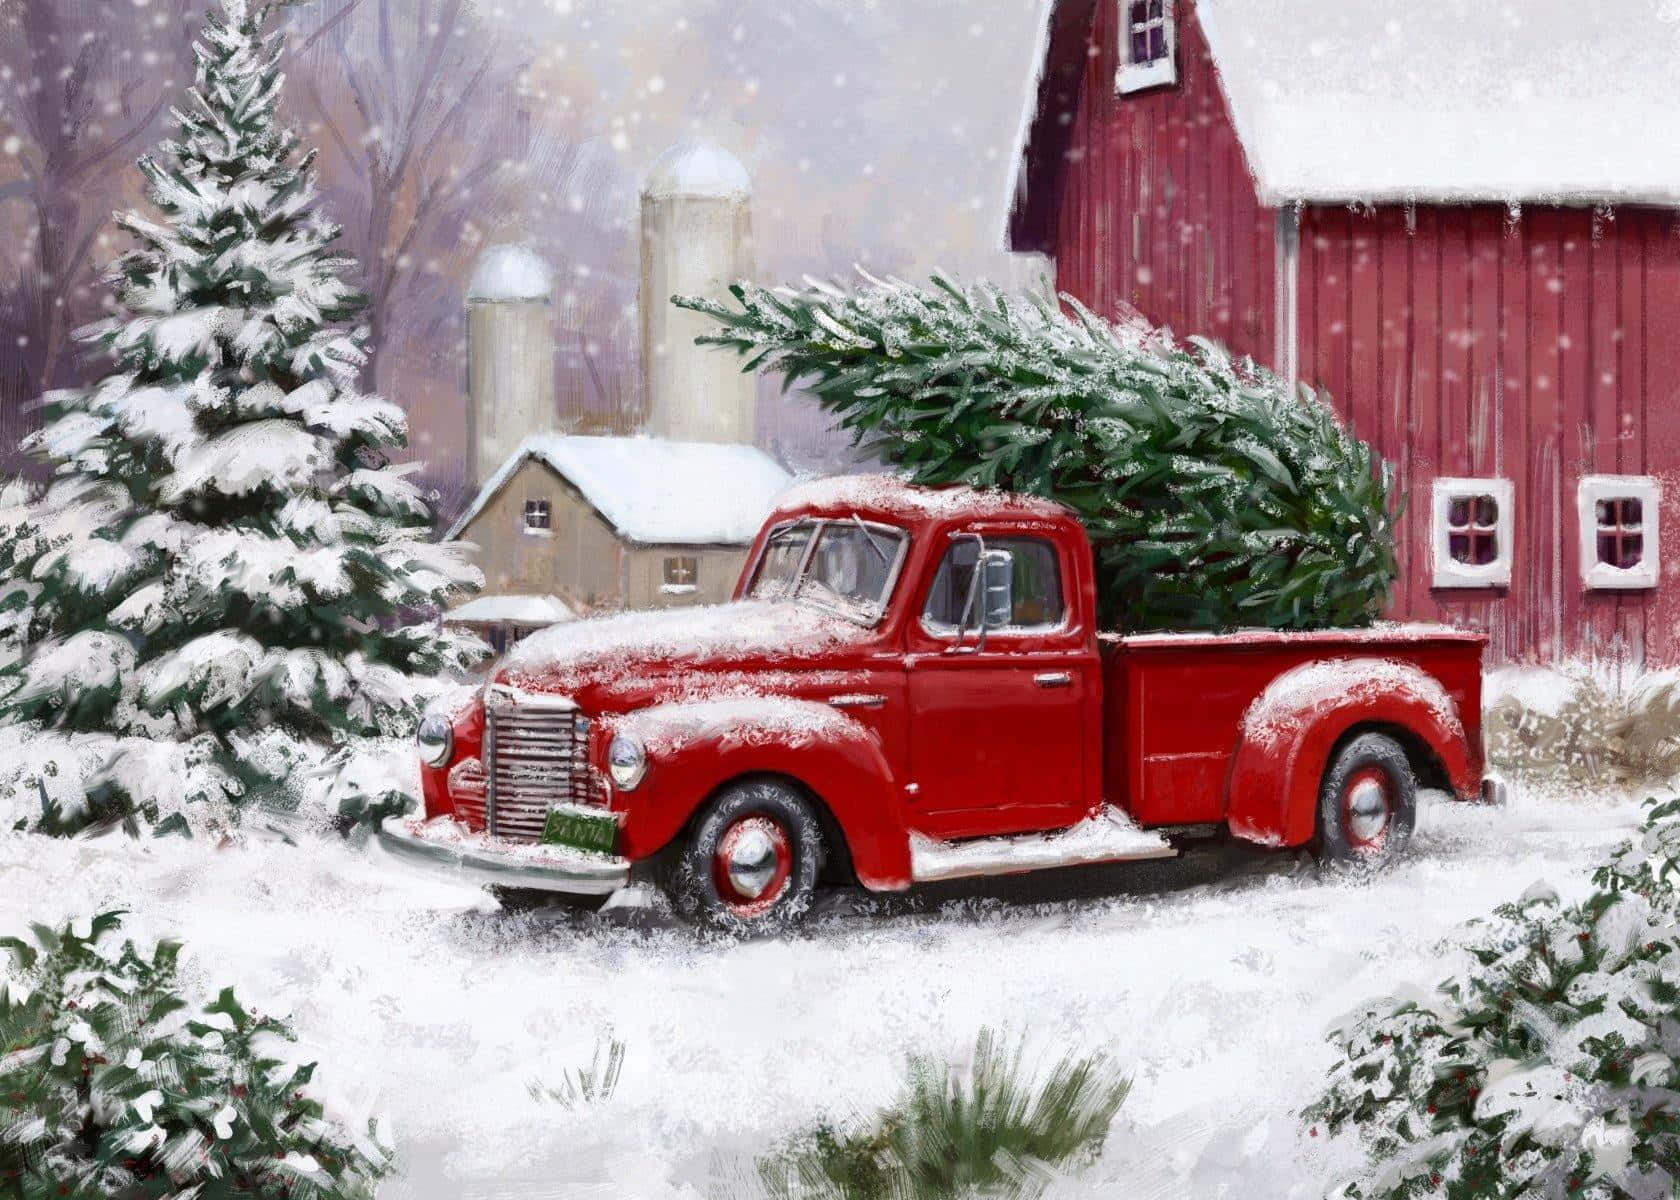 Christmas cheer in a vintage truck. Wallpaper